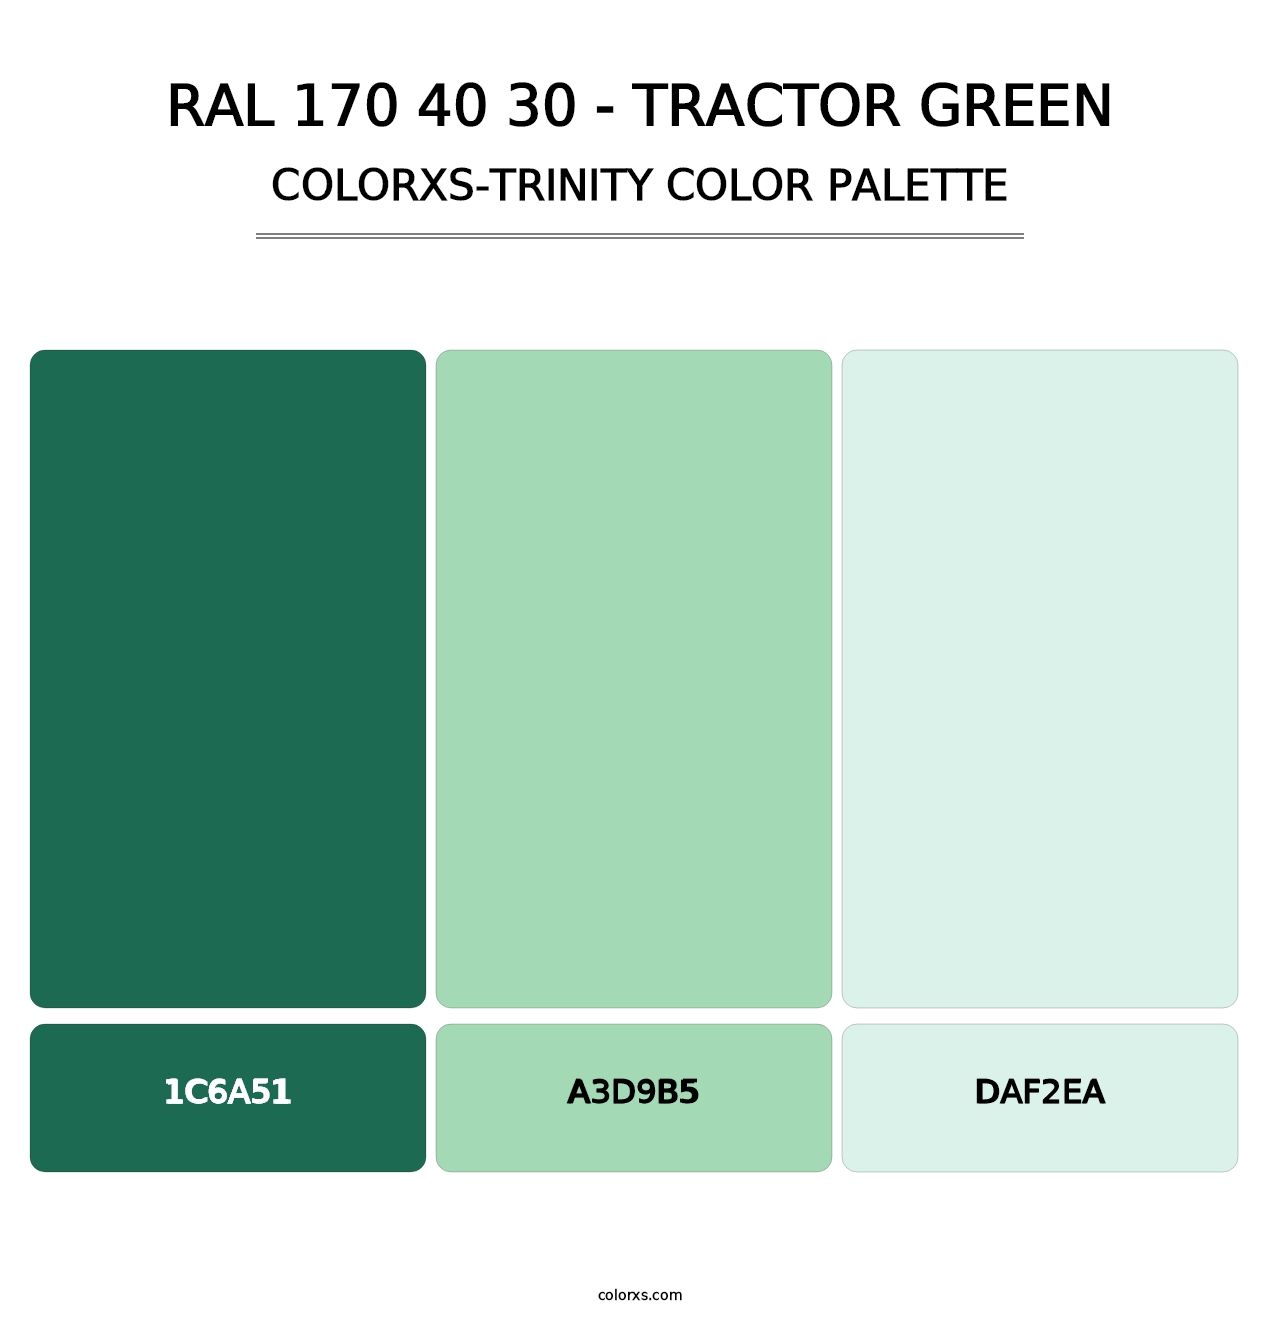 RAL 170 40 30 - Tractor Green - Colorxs Trinity Palette